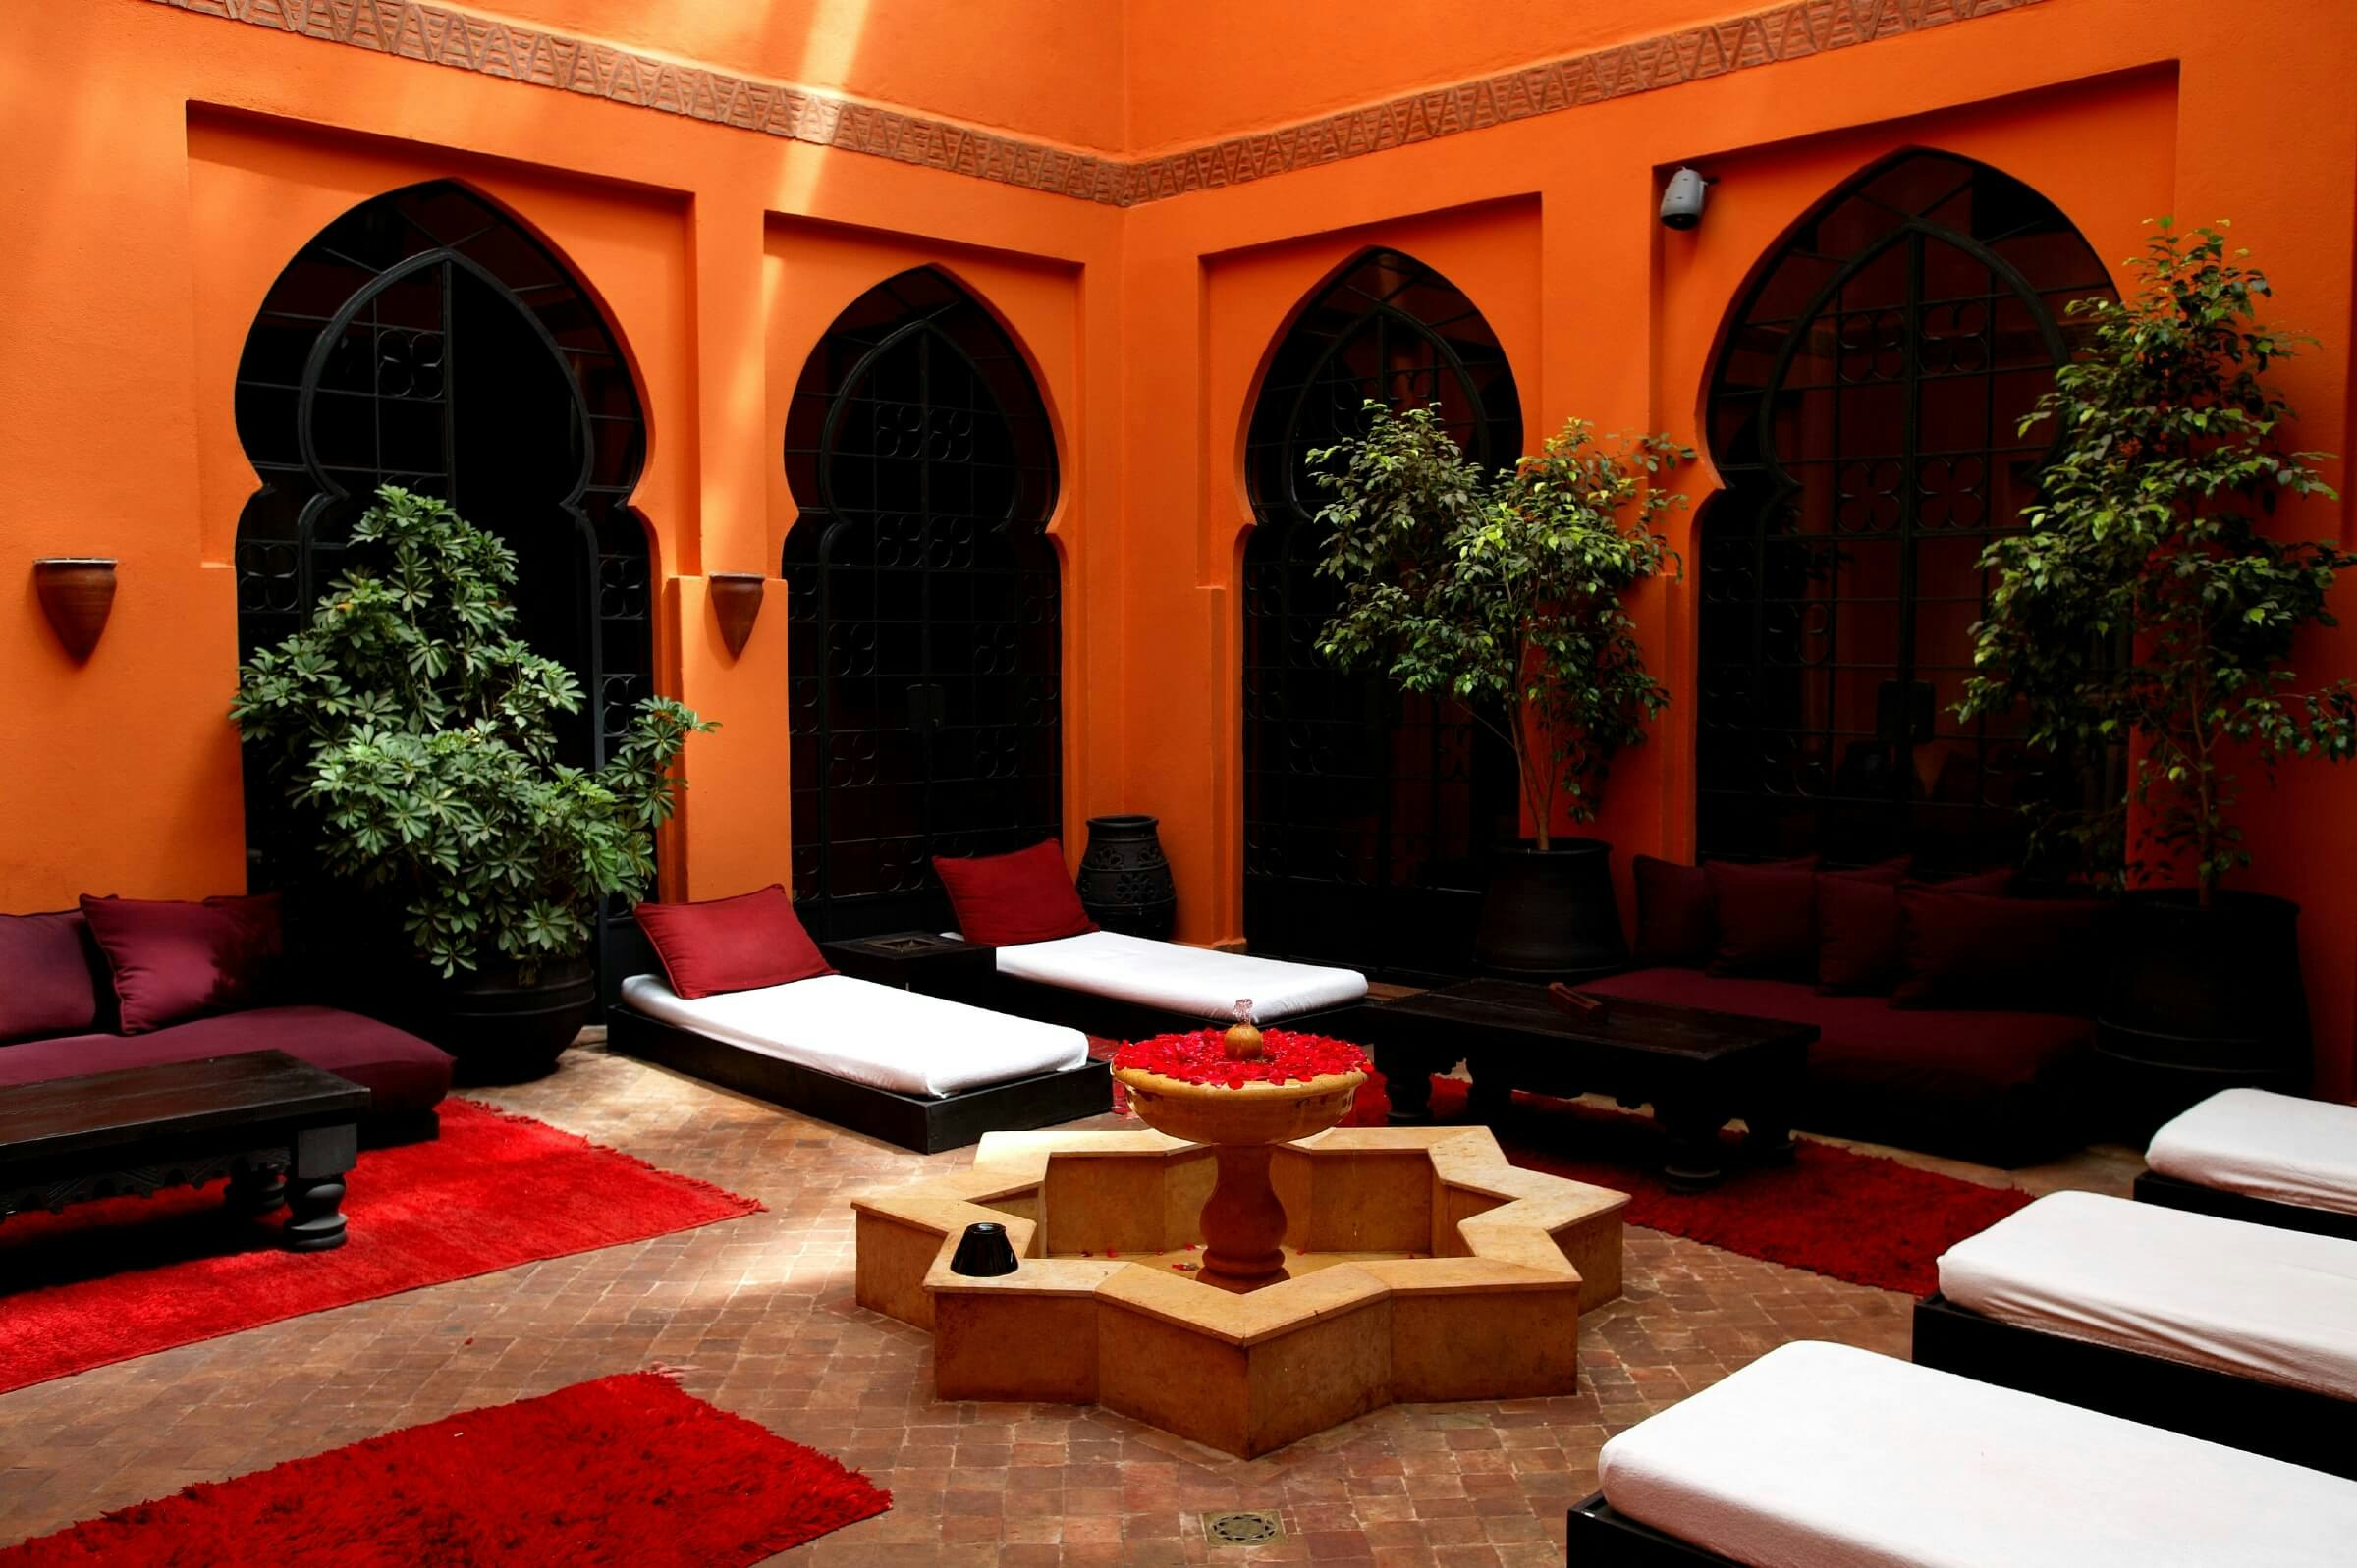 A riad with orange walls, a fountain in the middle of the room and loungers dotted around the room.